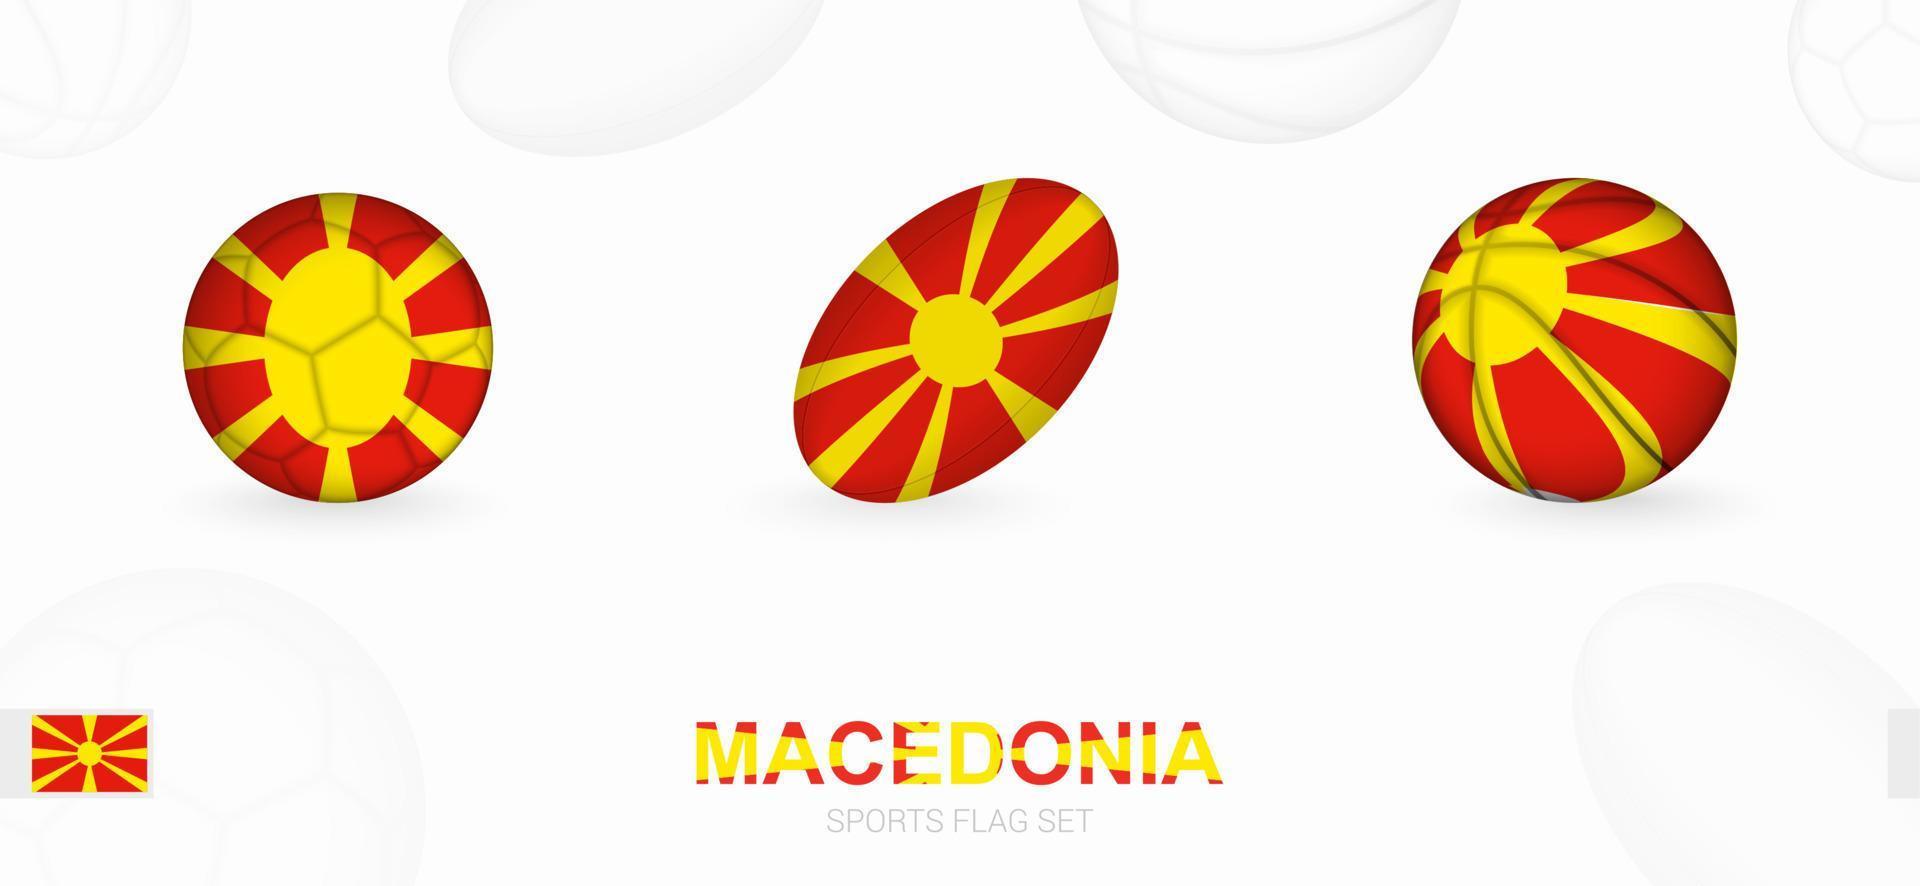 Sports icons for football, rugby and basketball with the flag of Macedonia. vector